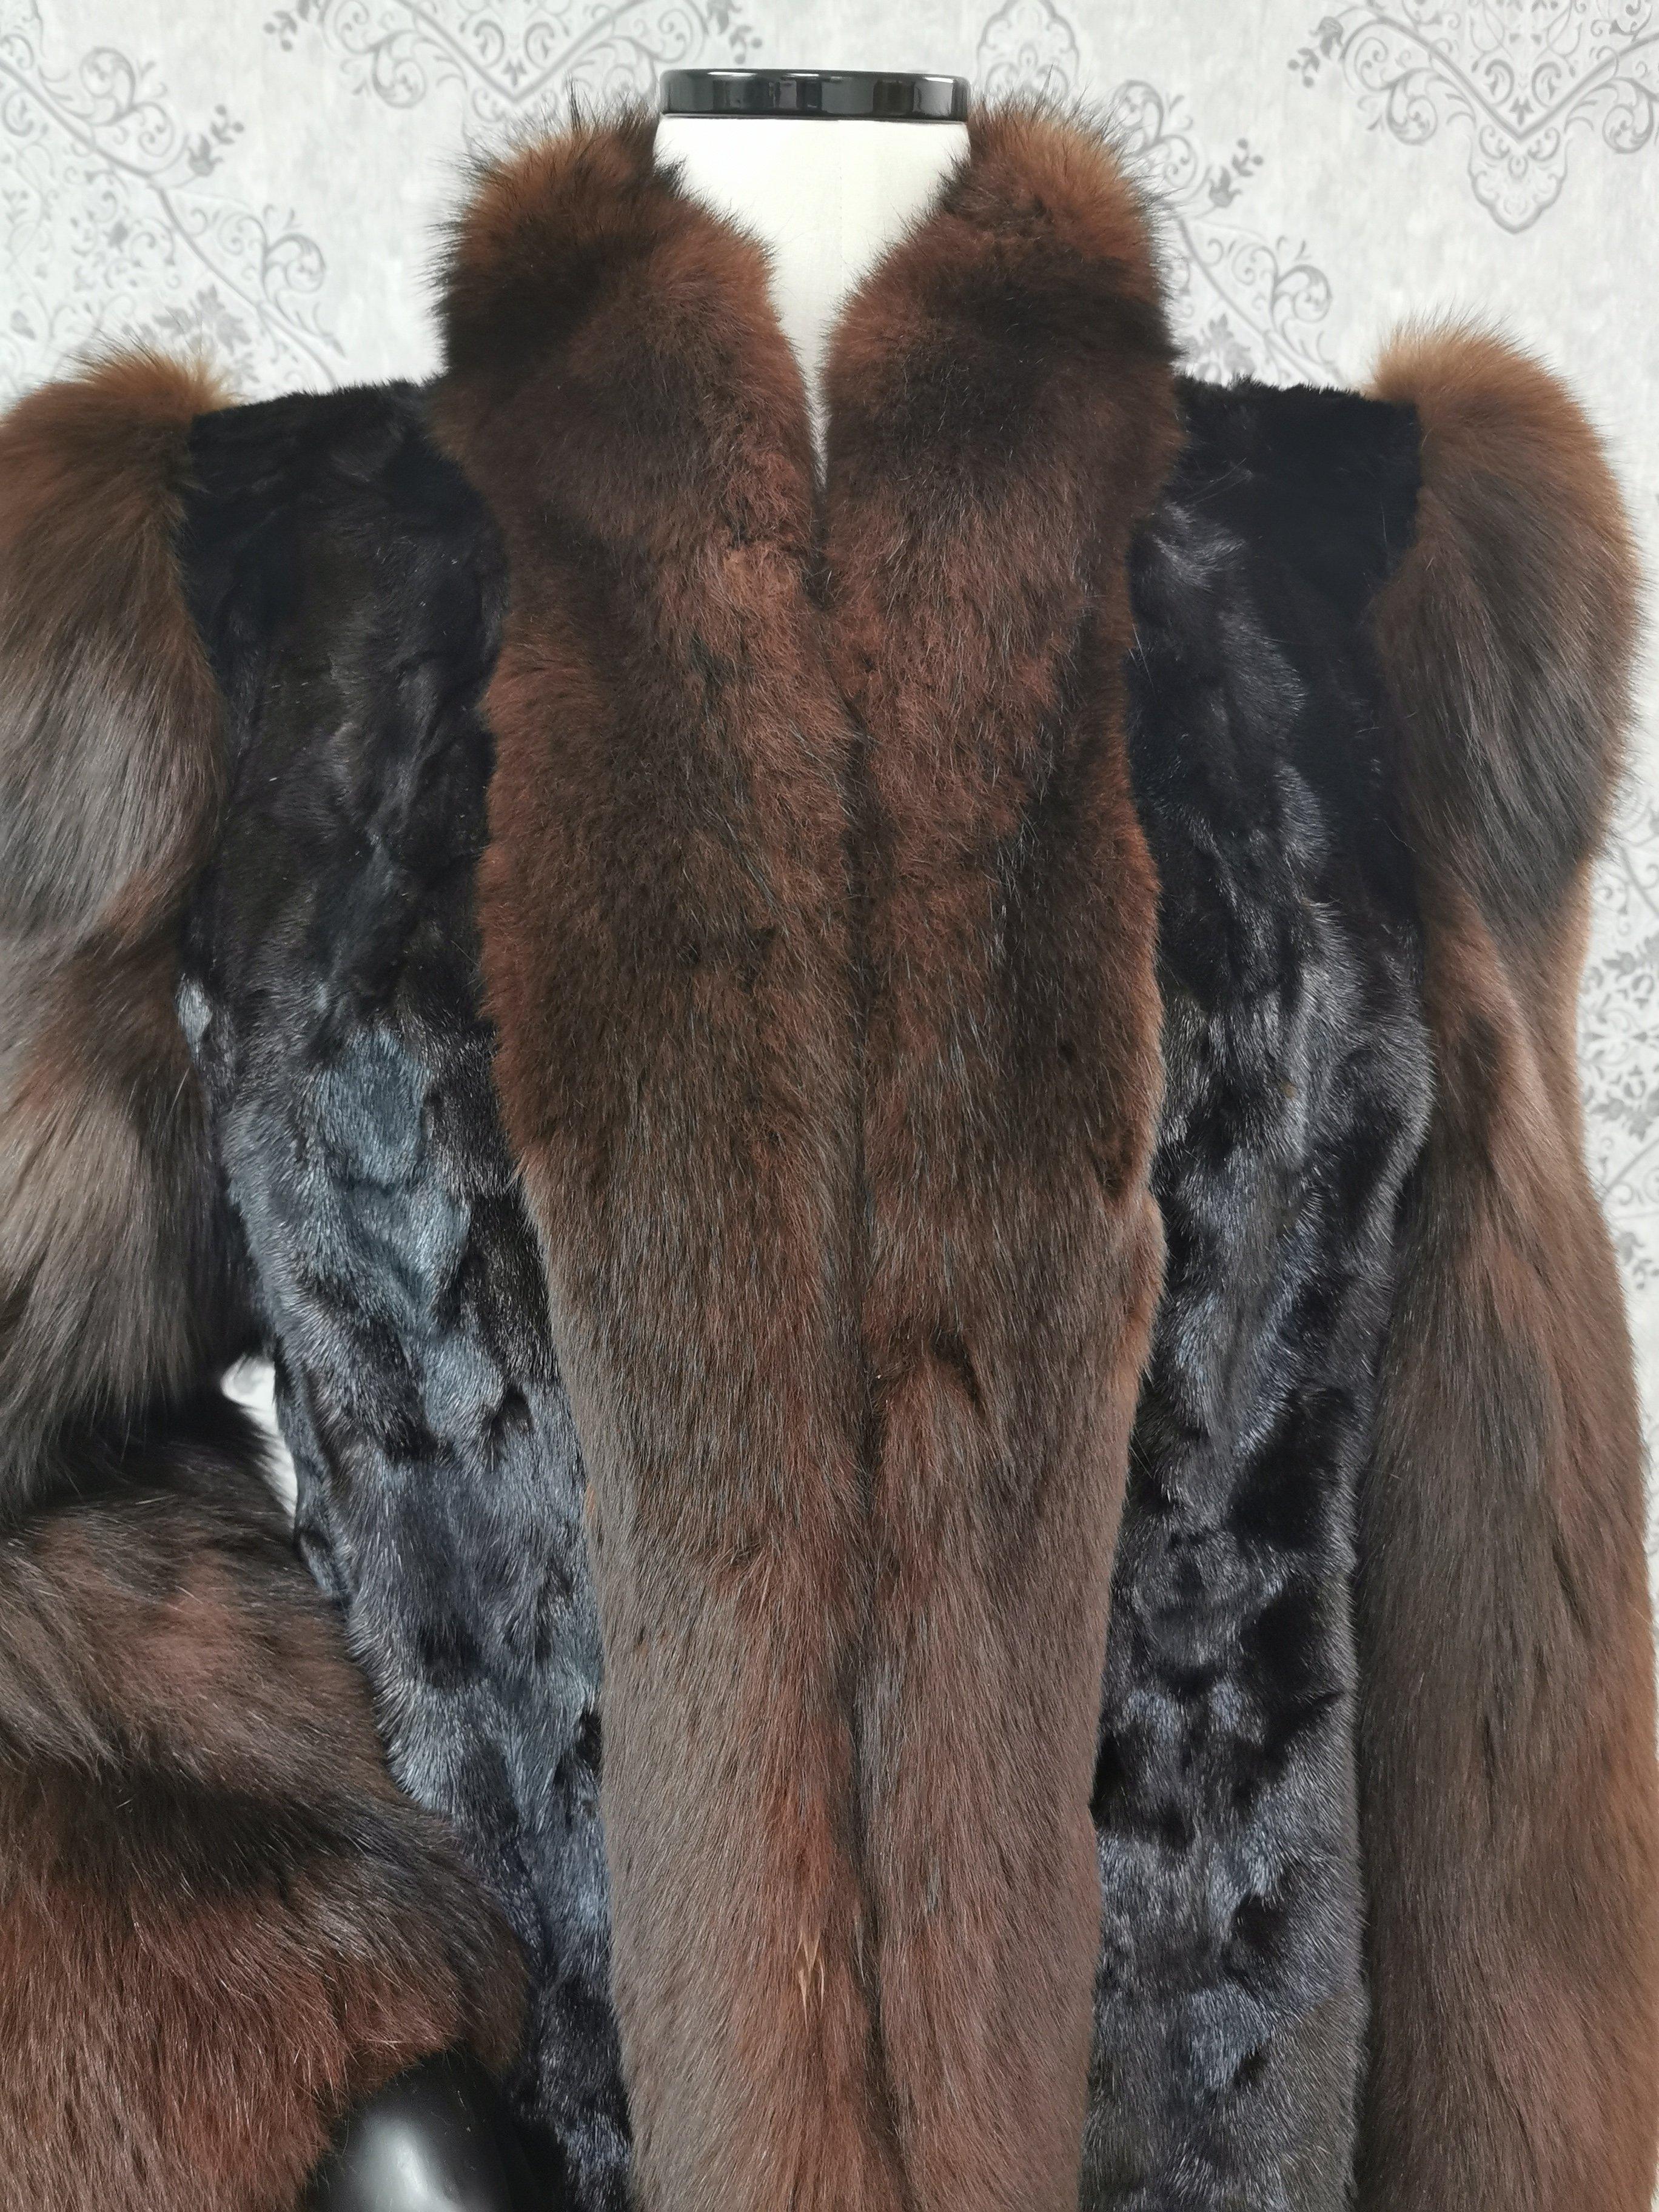 Black Pre-owned Mink Fur Coat with Shadow Fox Fur Trim and Sleeves (Size 10-M)